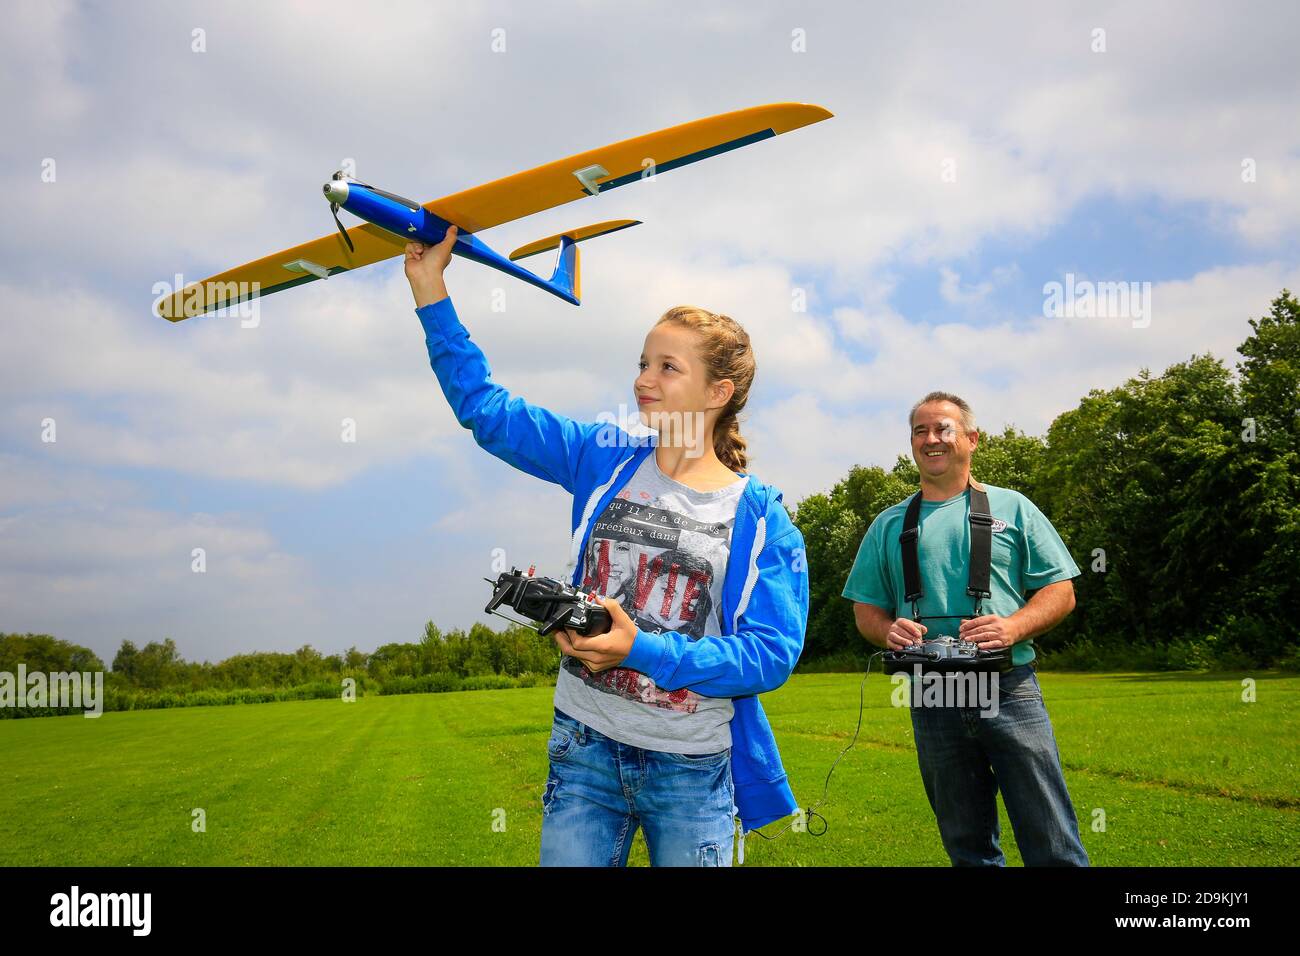 Essen, North Rhine-Westphalia, Ruhr area, Germany, the Hallopark in the north of Essen is one of the oldest green areas in Essen, Flugmodell-Sport-Club Essen am Hallopark, girls taking flight lessons with a flight instructor, here on the occasion of the Essen 2017 Green Capital of Europe. Stock Photo